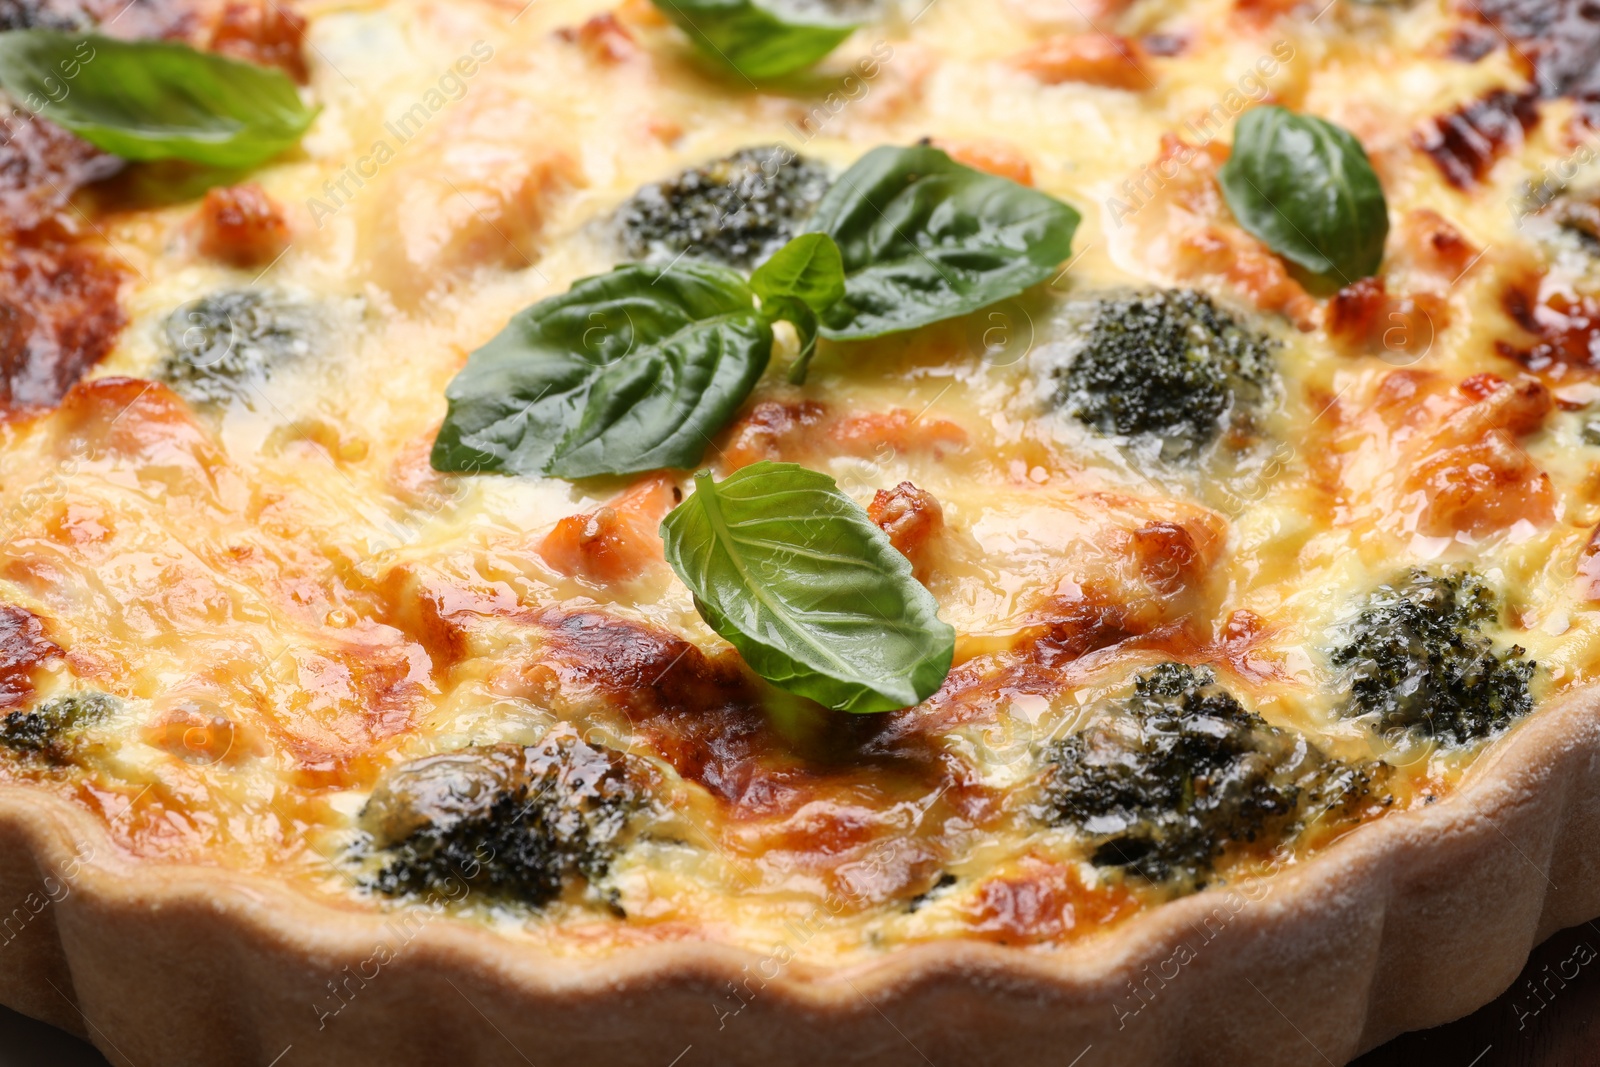 Photo of Delicious homemade quiche with salmon, broccoli and basil leaves, closeup